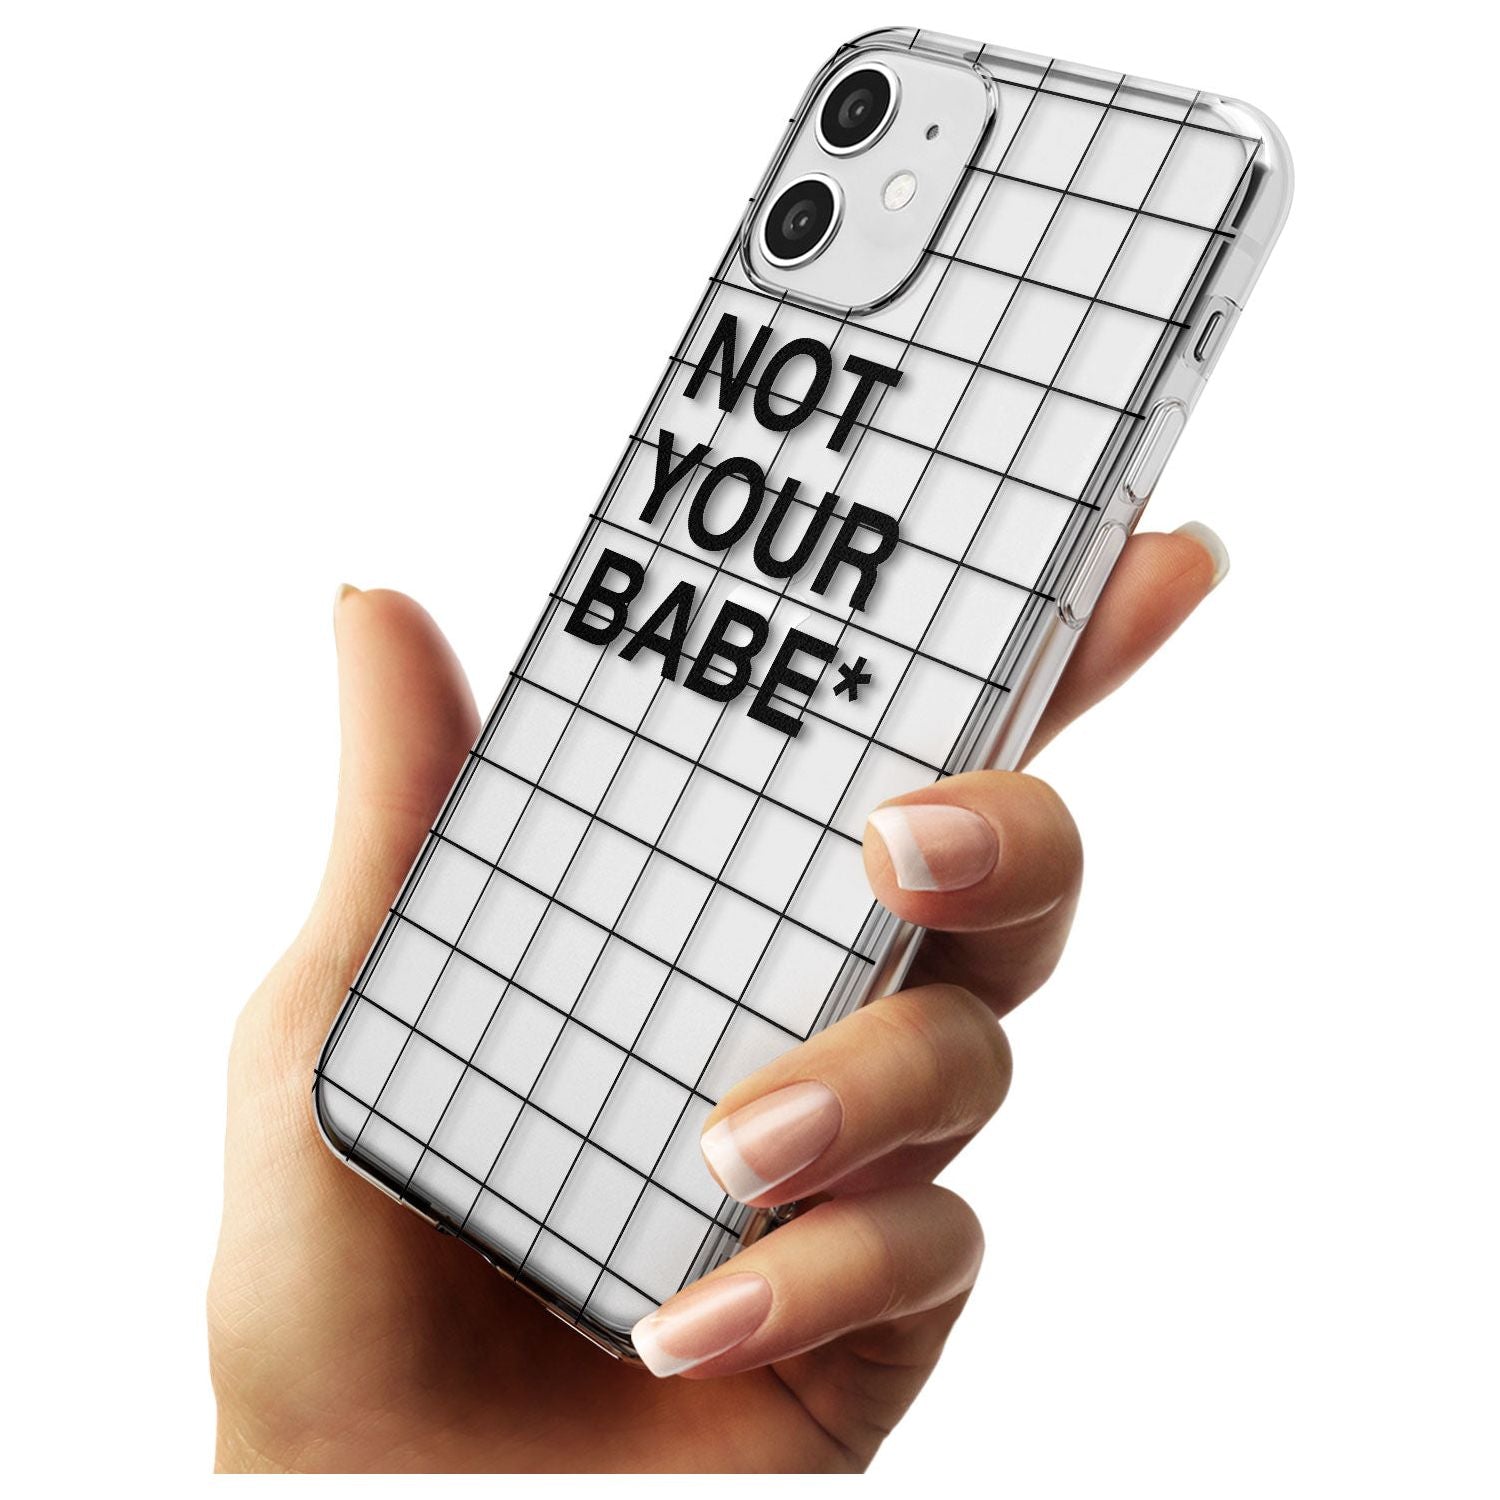 Grid Pattern Not Your Babe Slim TPU Phone Case for iPhone 11